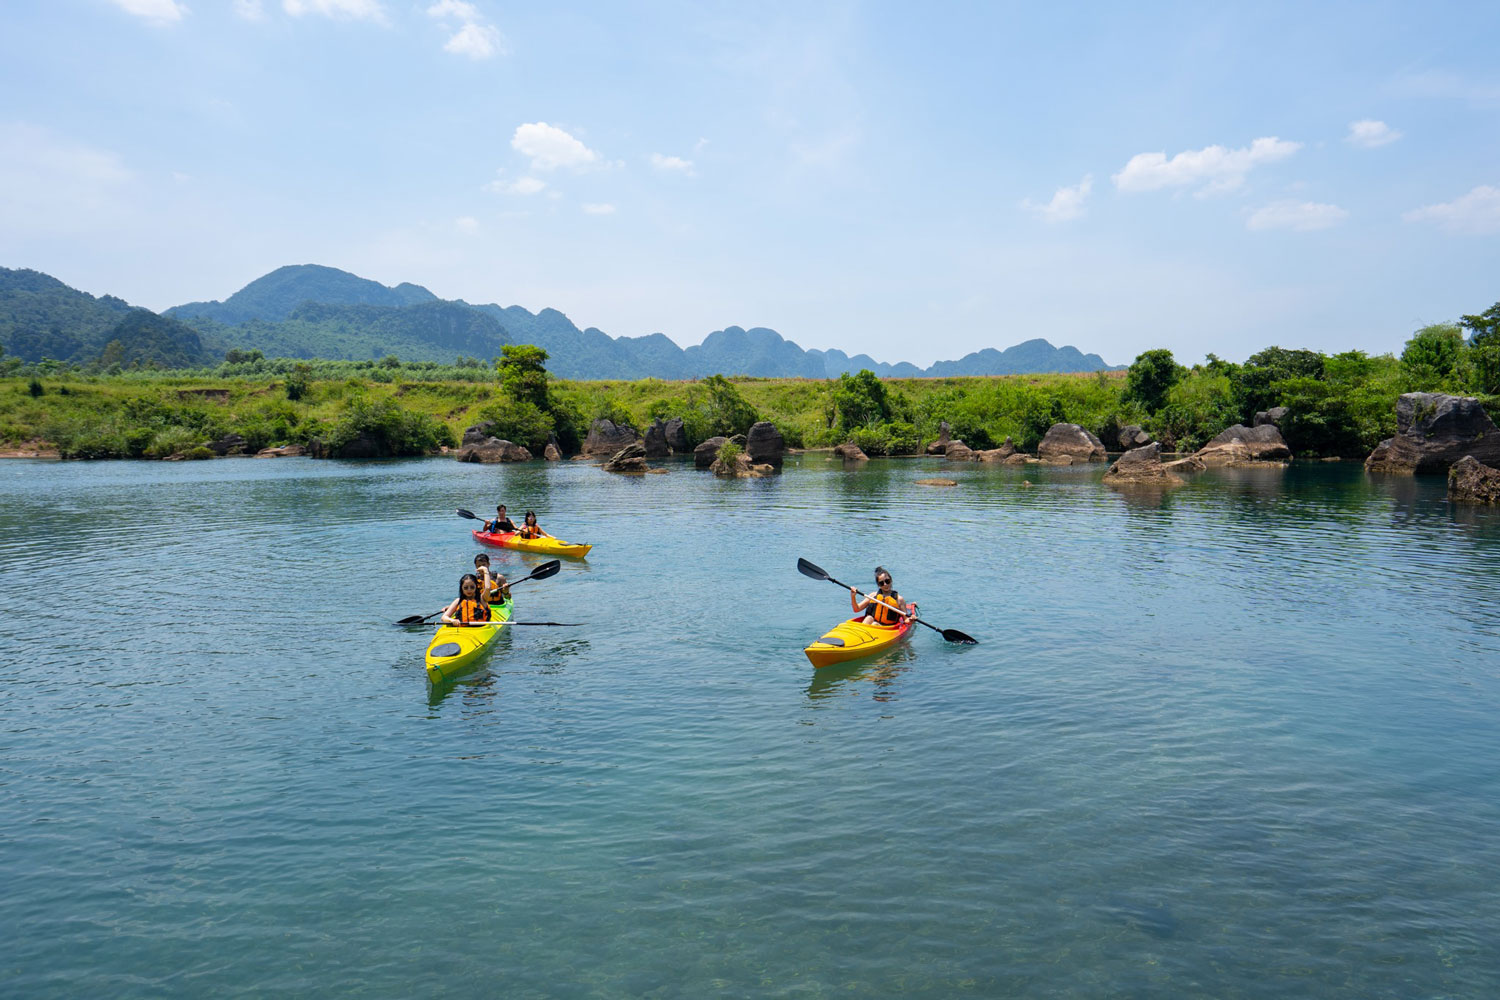 Paddling through the stunning scenery of the Chay River is a great way to relax and enjoy the natural beauty of Vietnam.